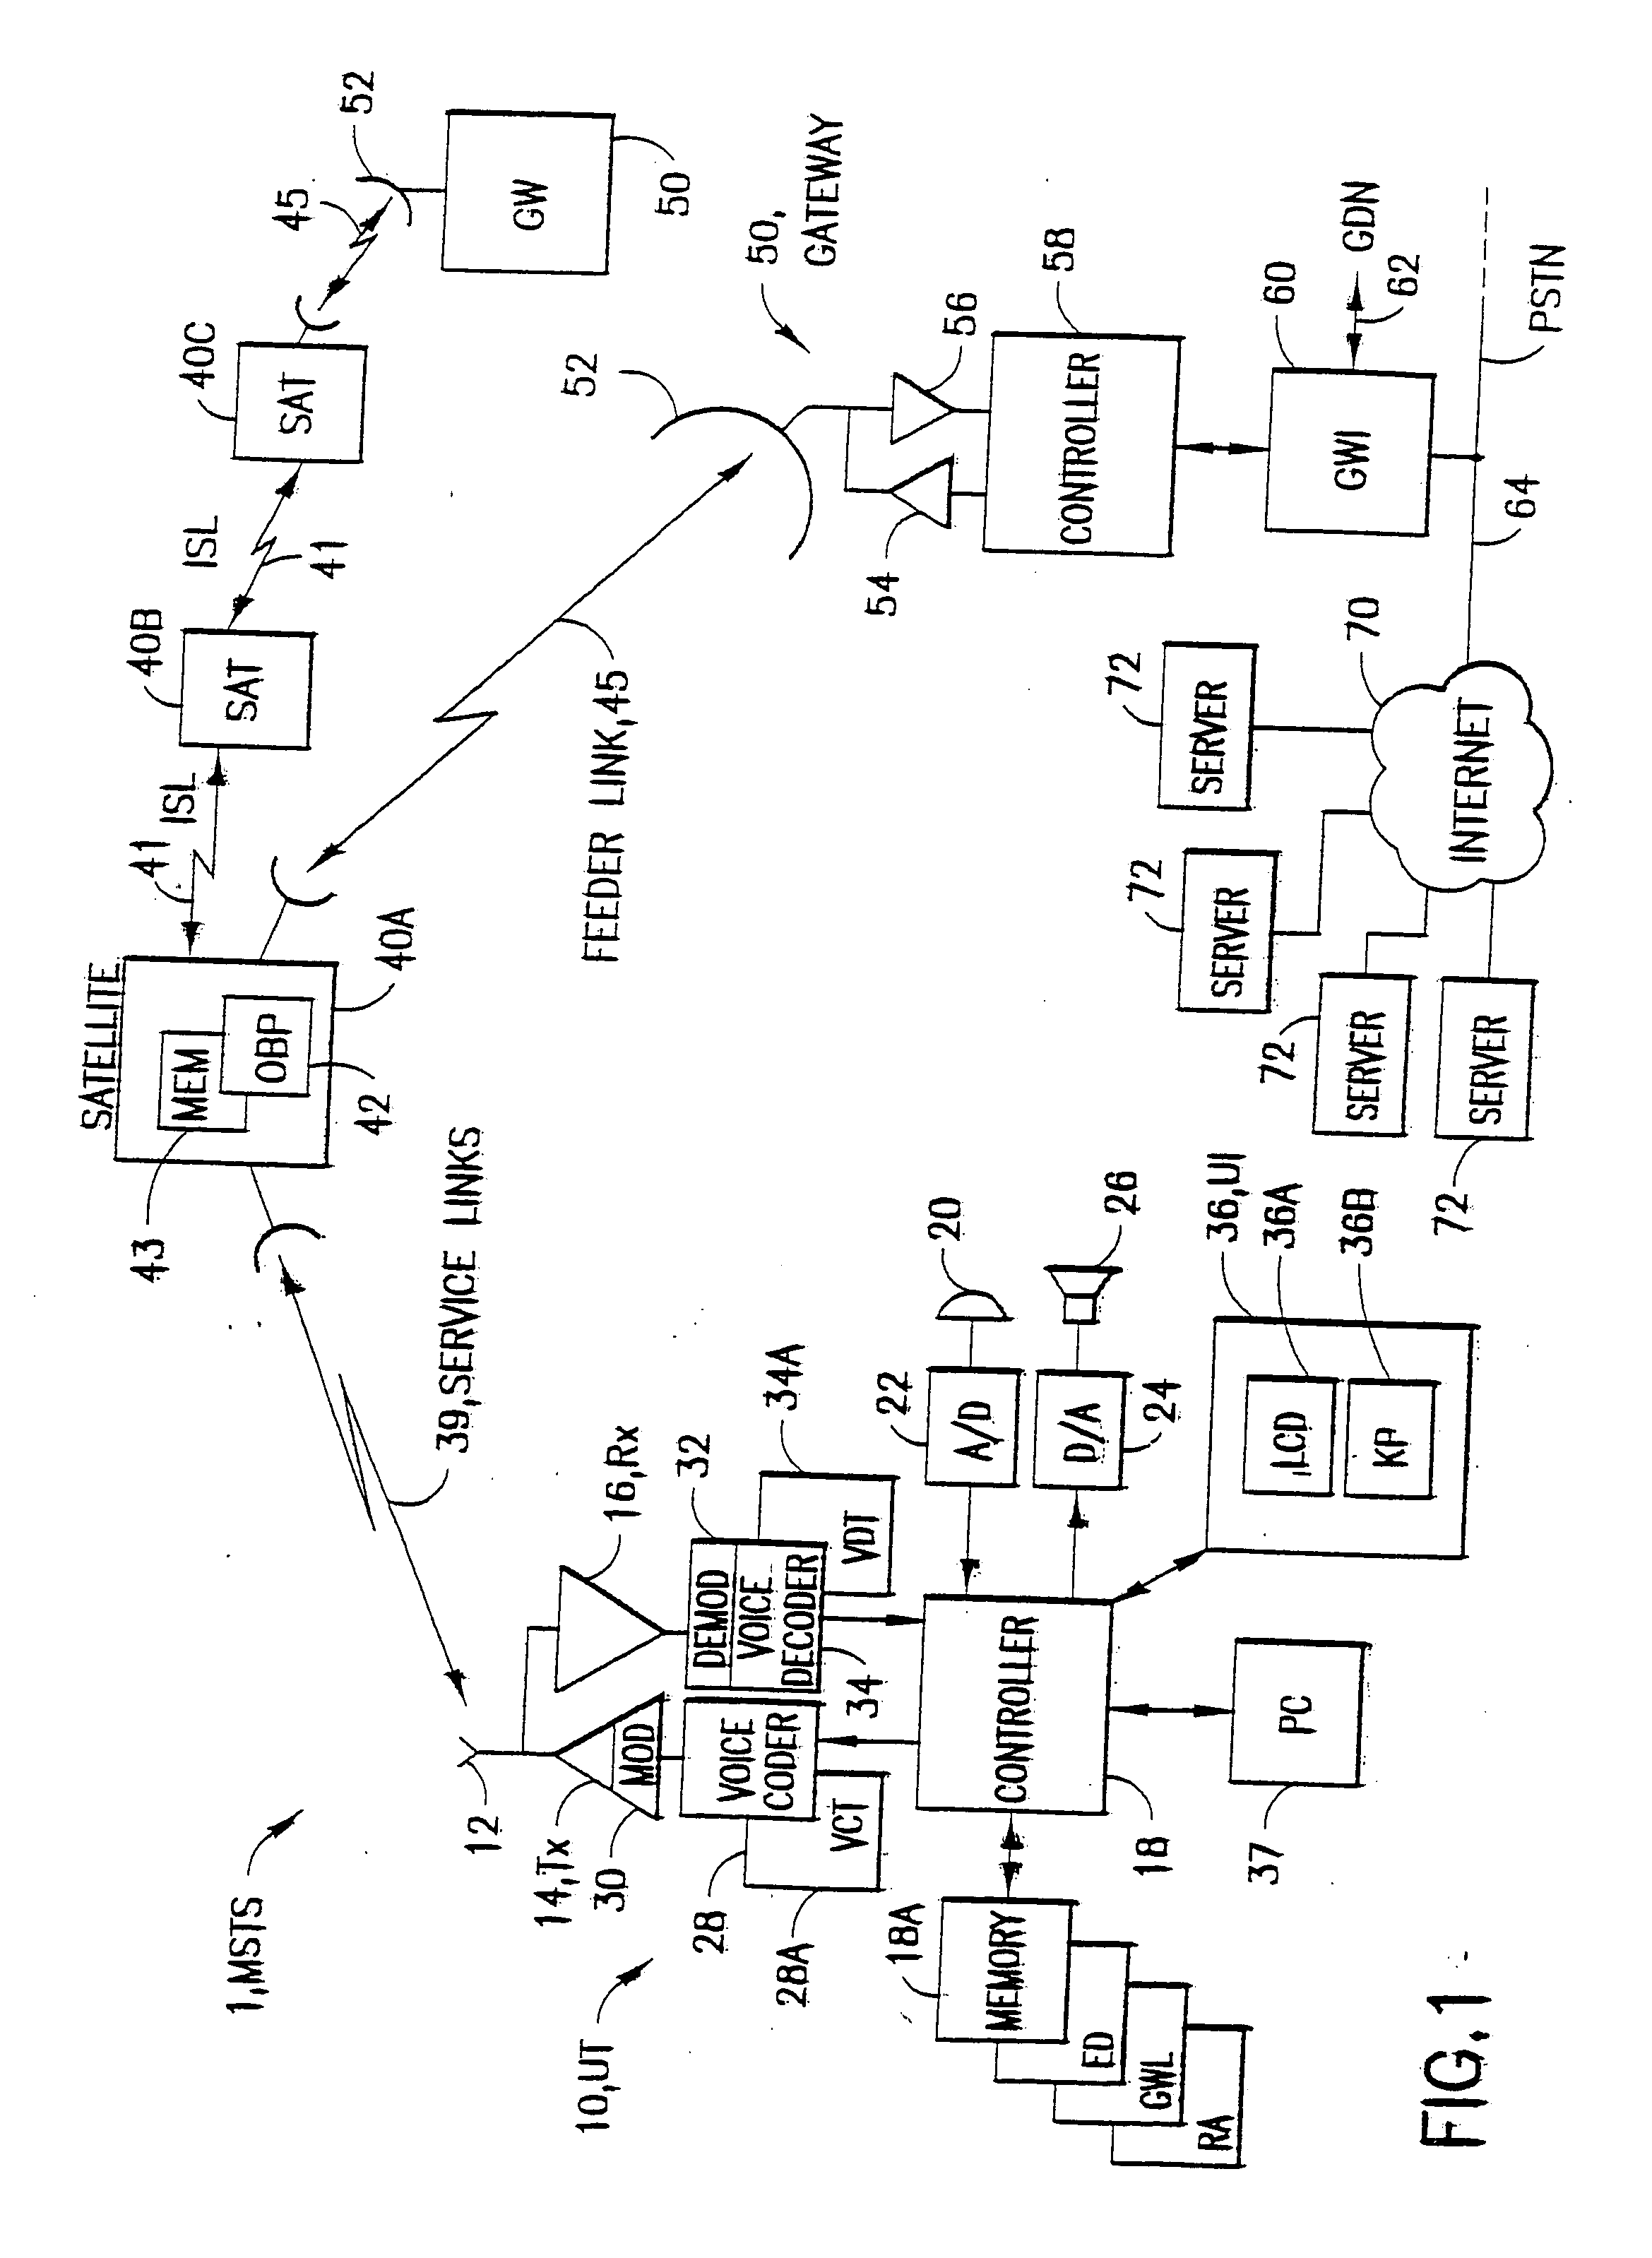 User terminal employing quality of service path determination and bandwidth saving mode for a satellite ISP system using non-geosynchronous orbit satellites